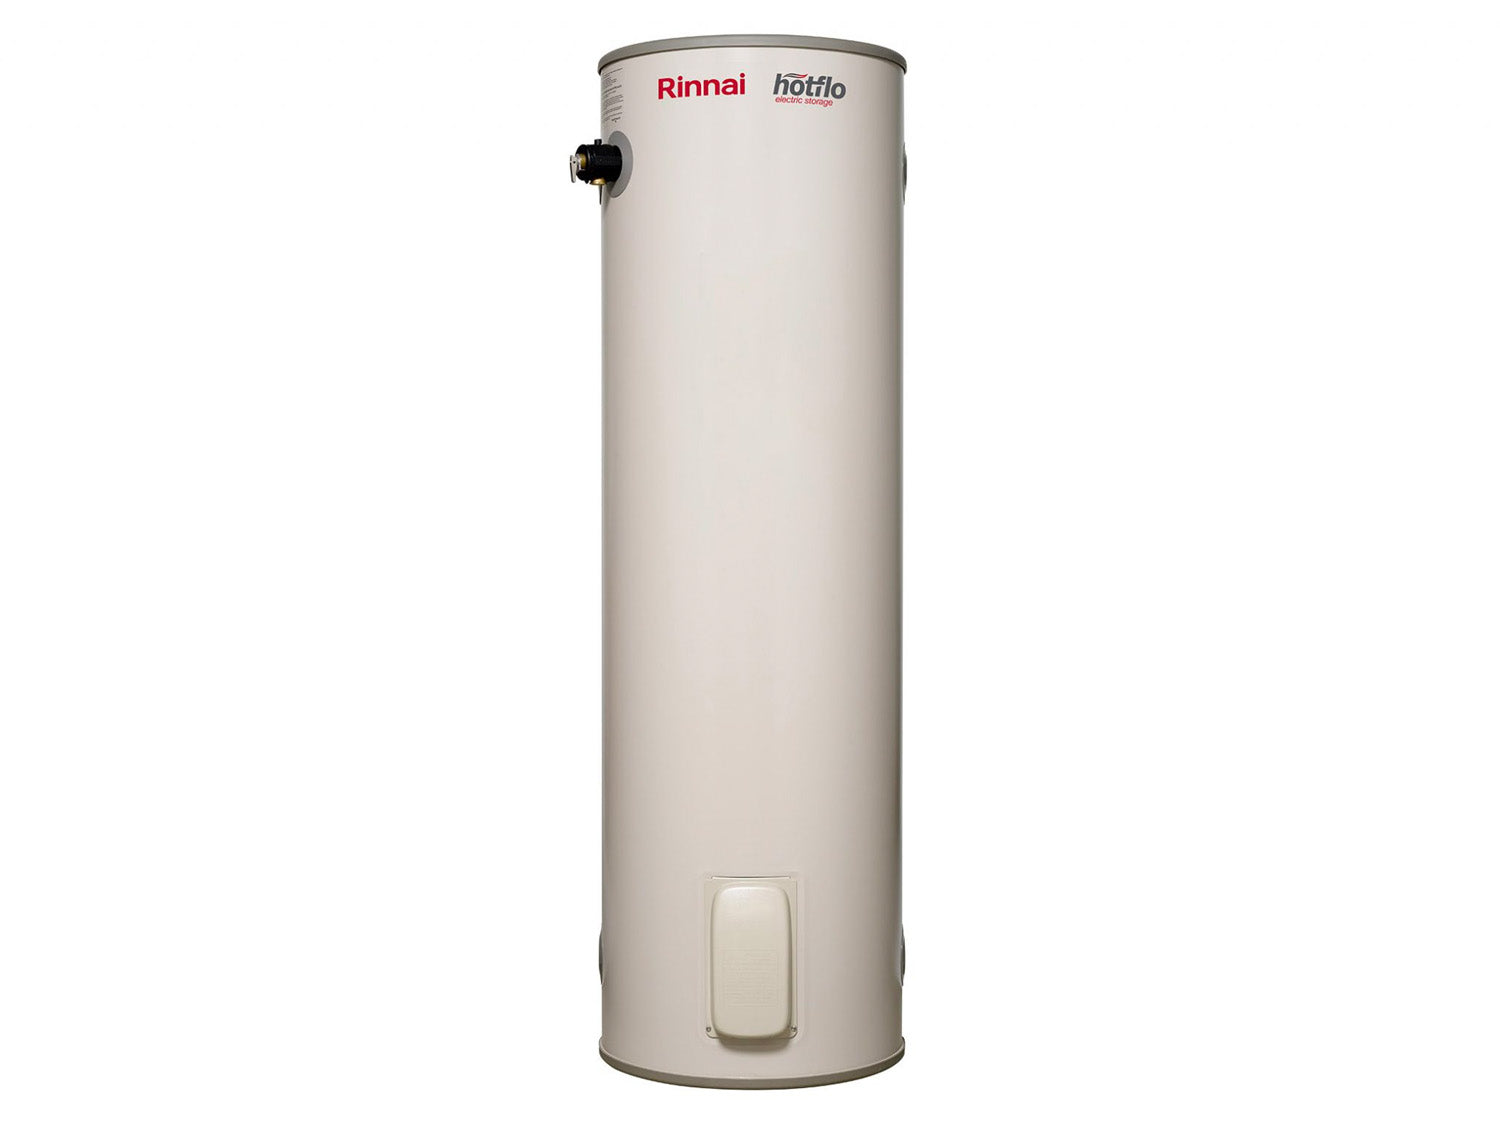 Rinnai EHFP160S36 Hotflo Plus 160L 3.6kW Electric Hot Water Storage Including Metro Perth Installation - Pacer Plumbing & Gas